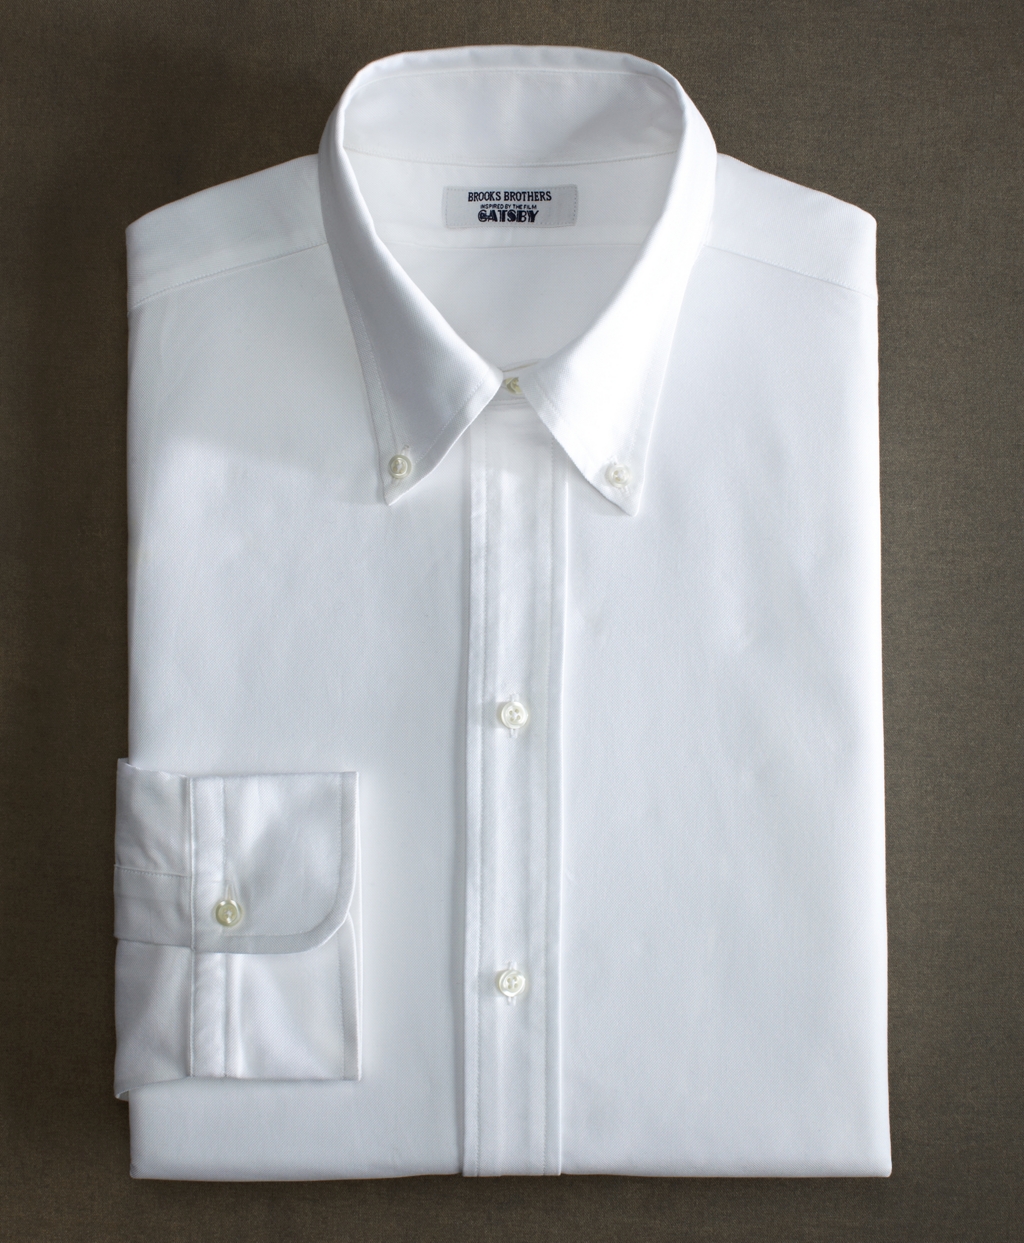 brooks-brothers-white-the-great-gatsby-collection-supima-cotton-slim-fit-buttondown-oxford-solid-dress-shirt-product-2-7839461-111122401.jpeg